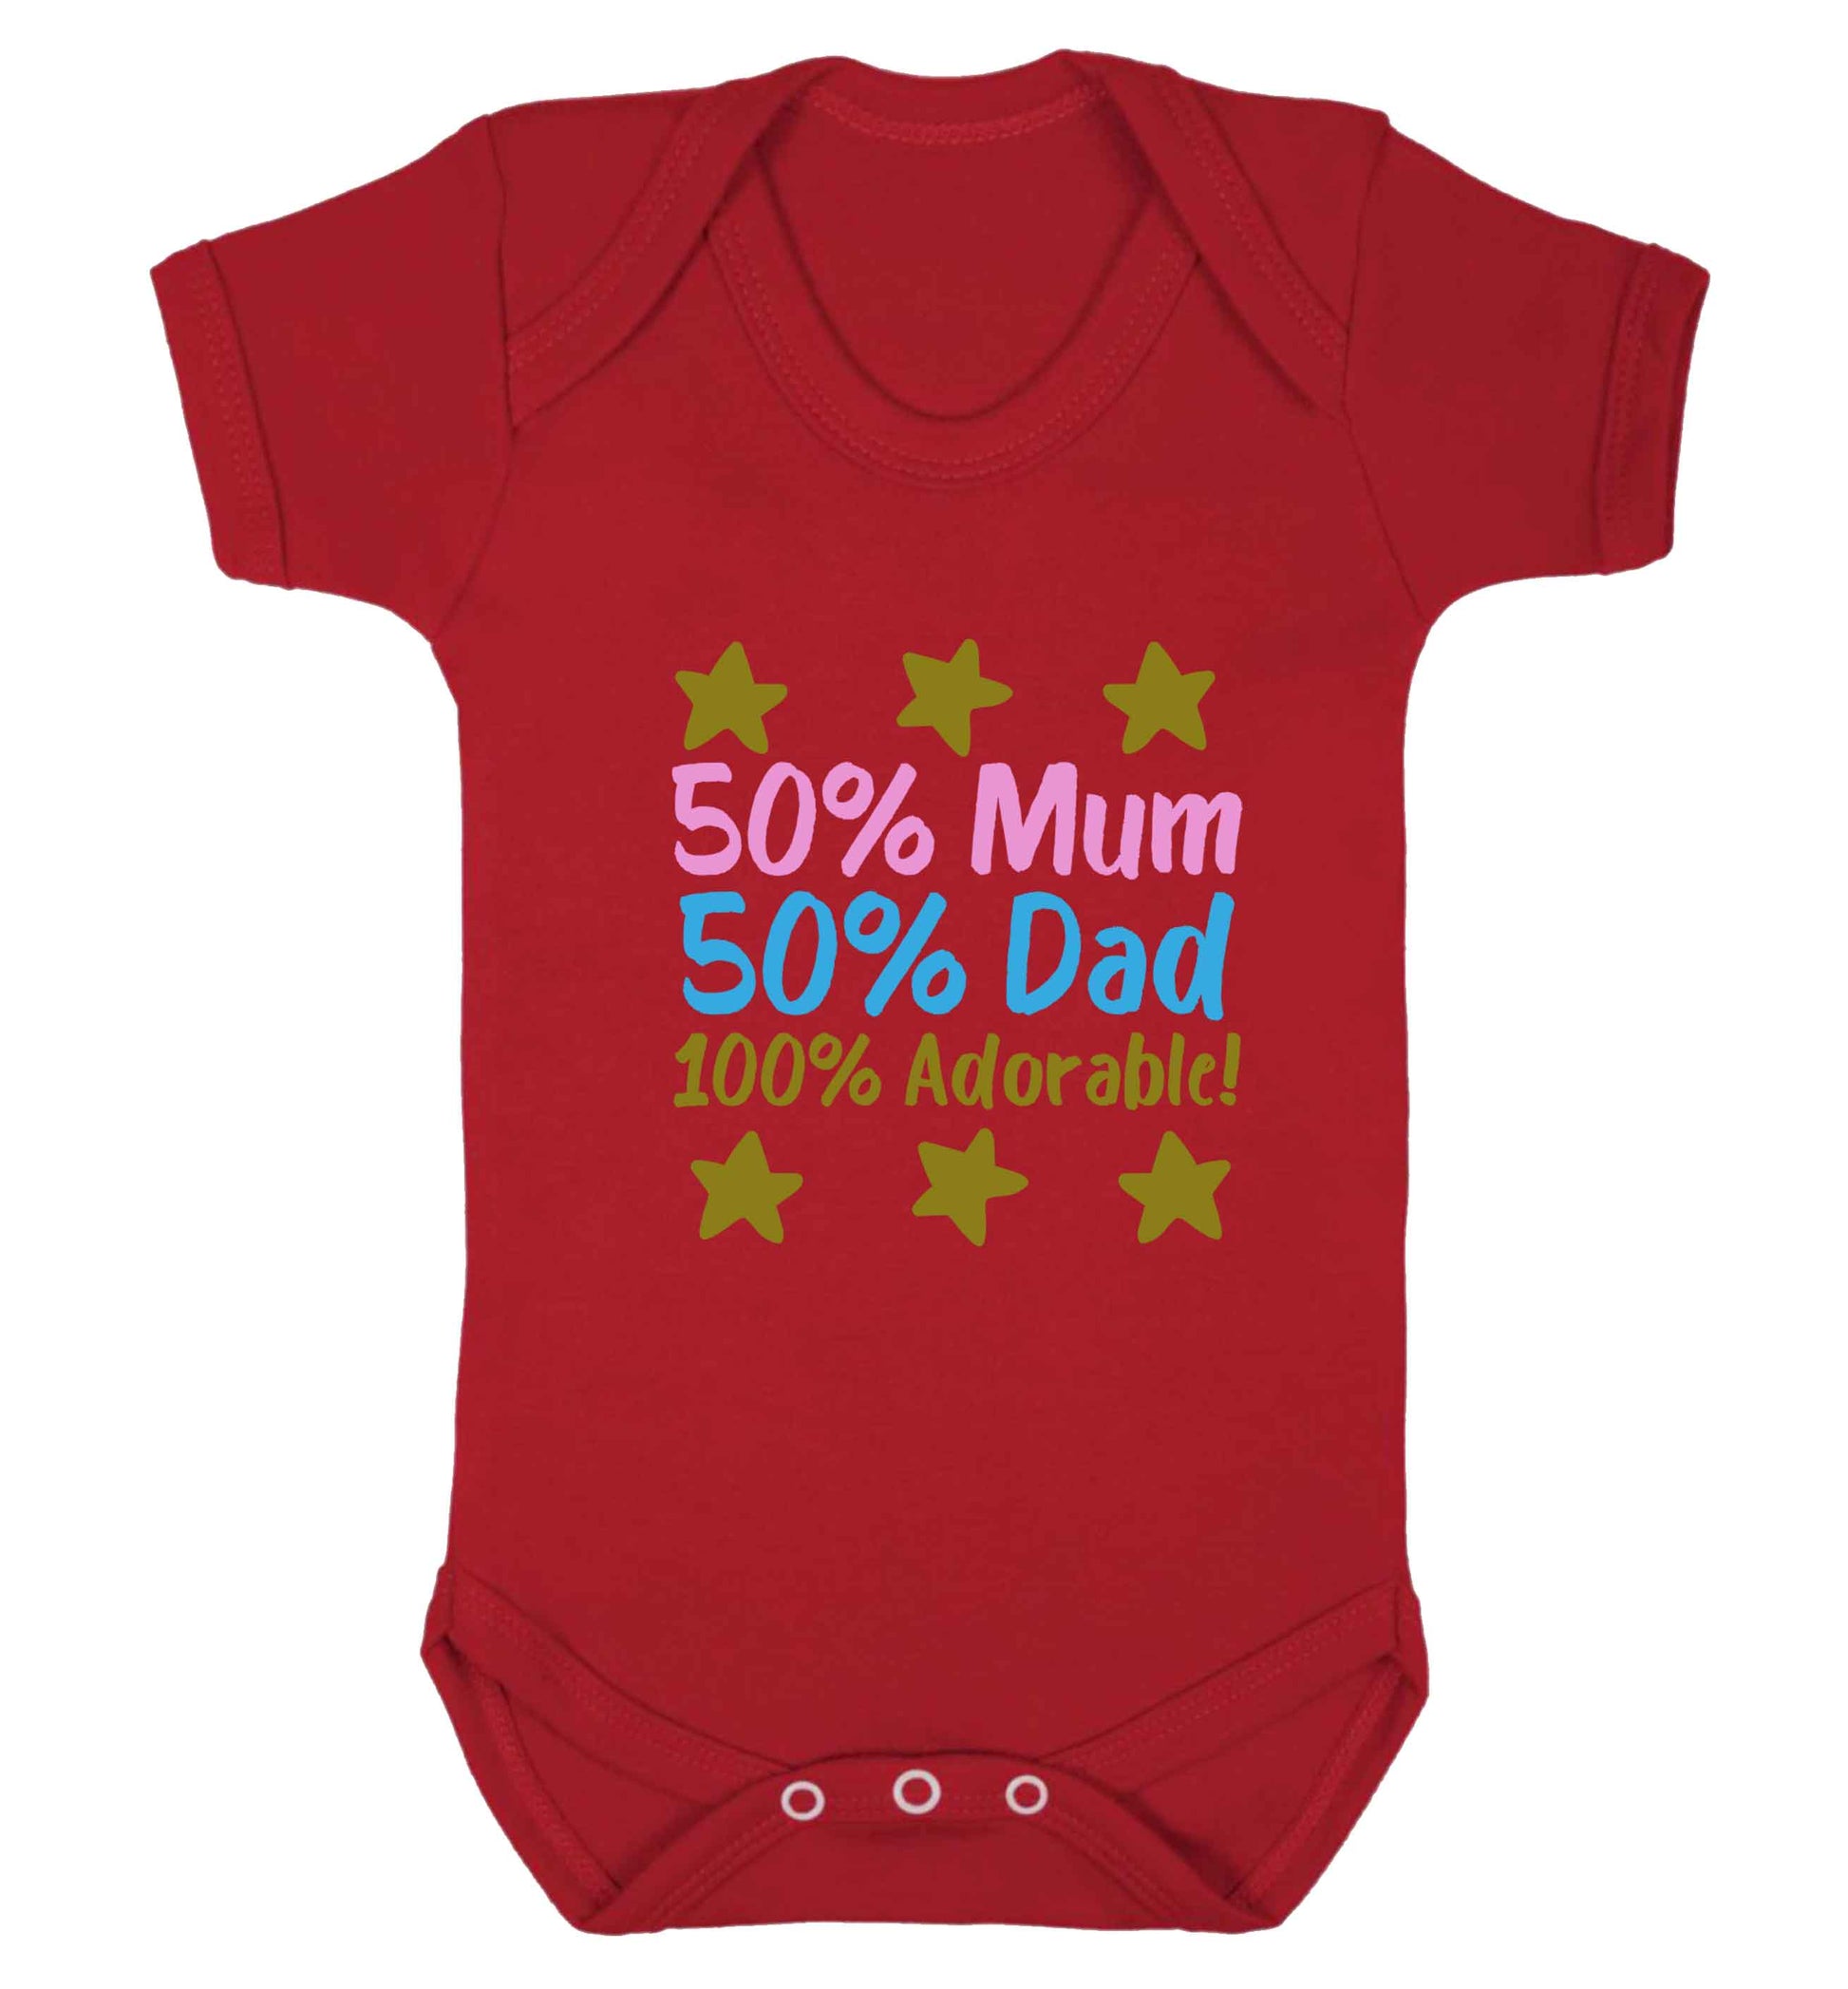 50% mum 50% dad 100% adorable baby vest red 18-24 months